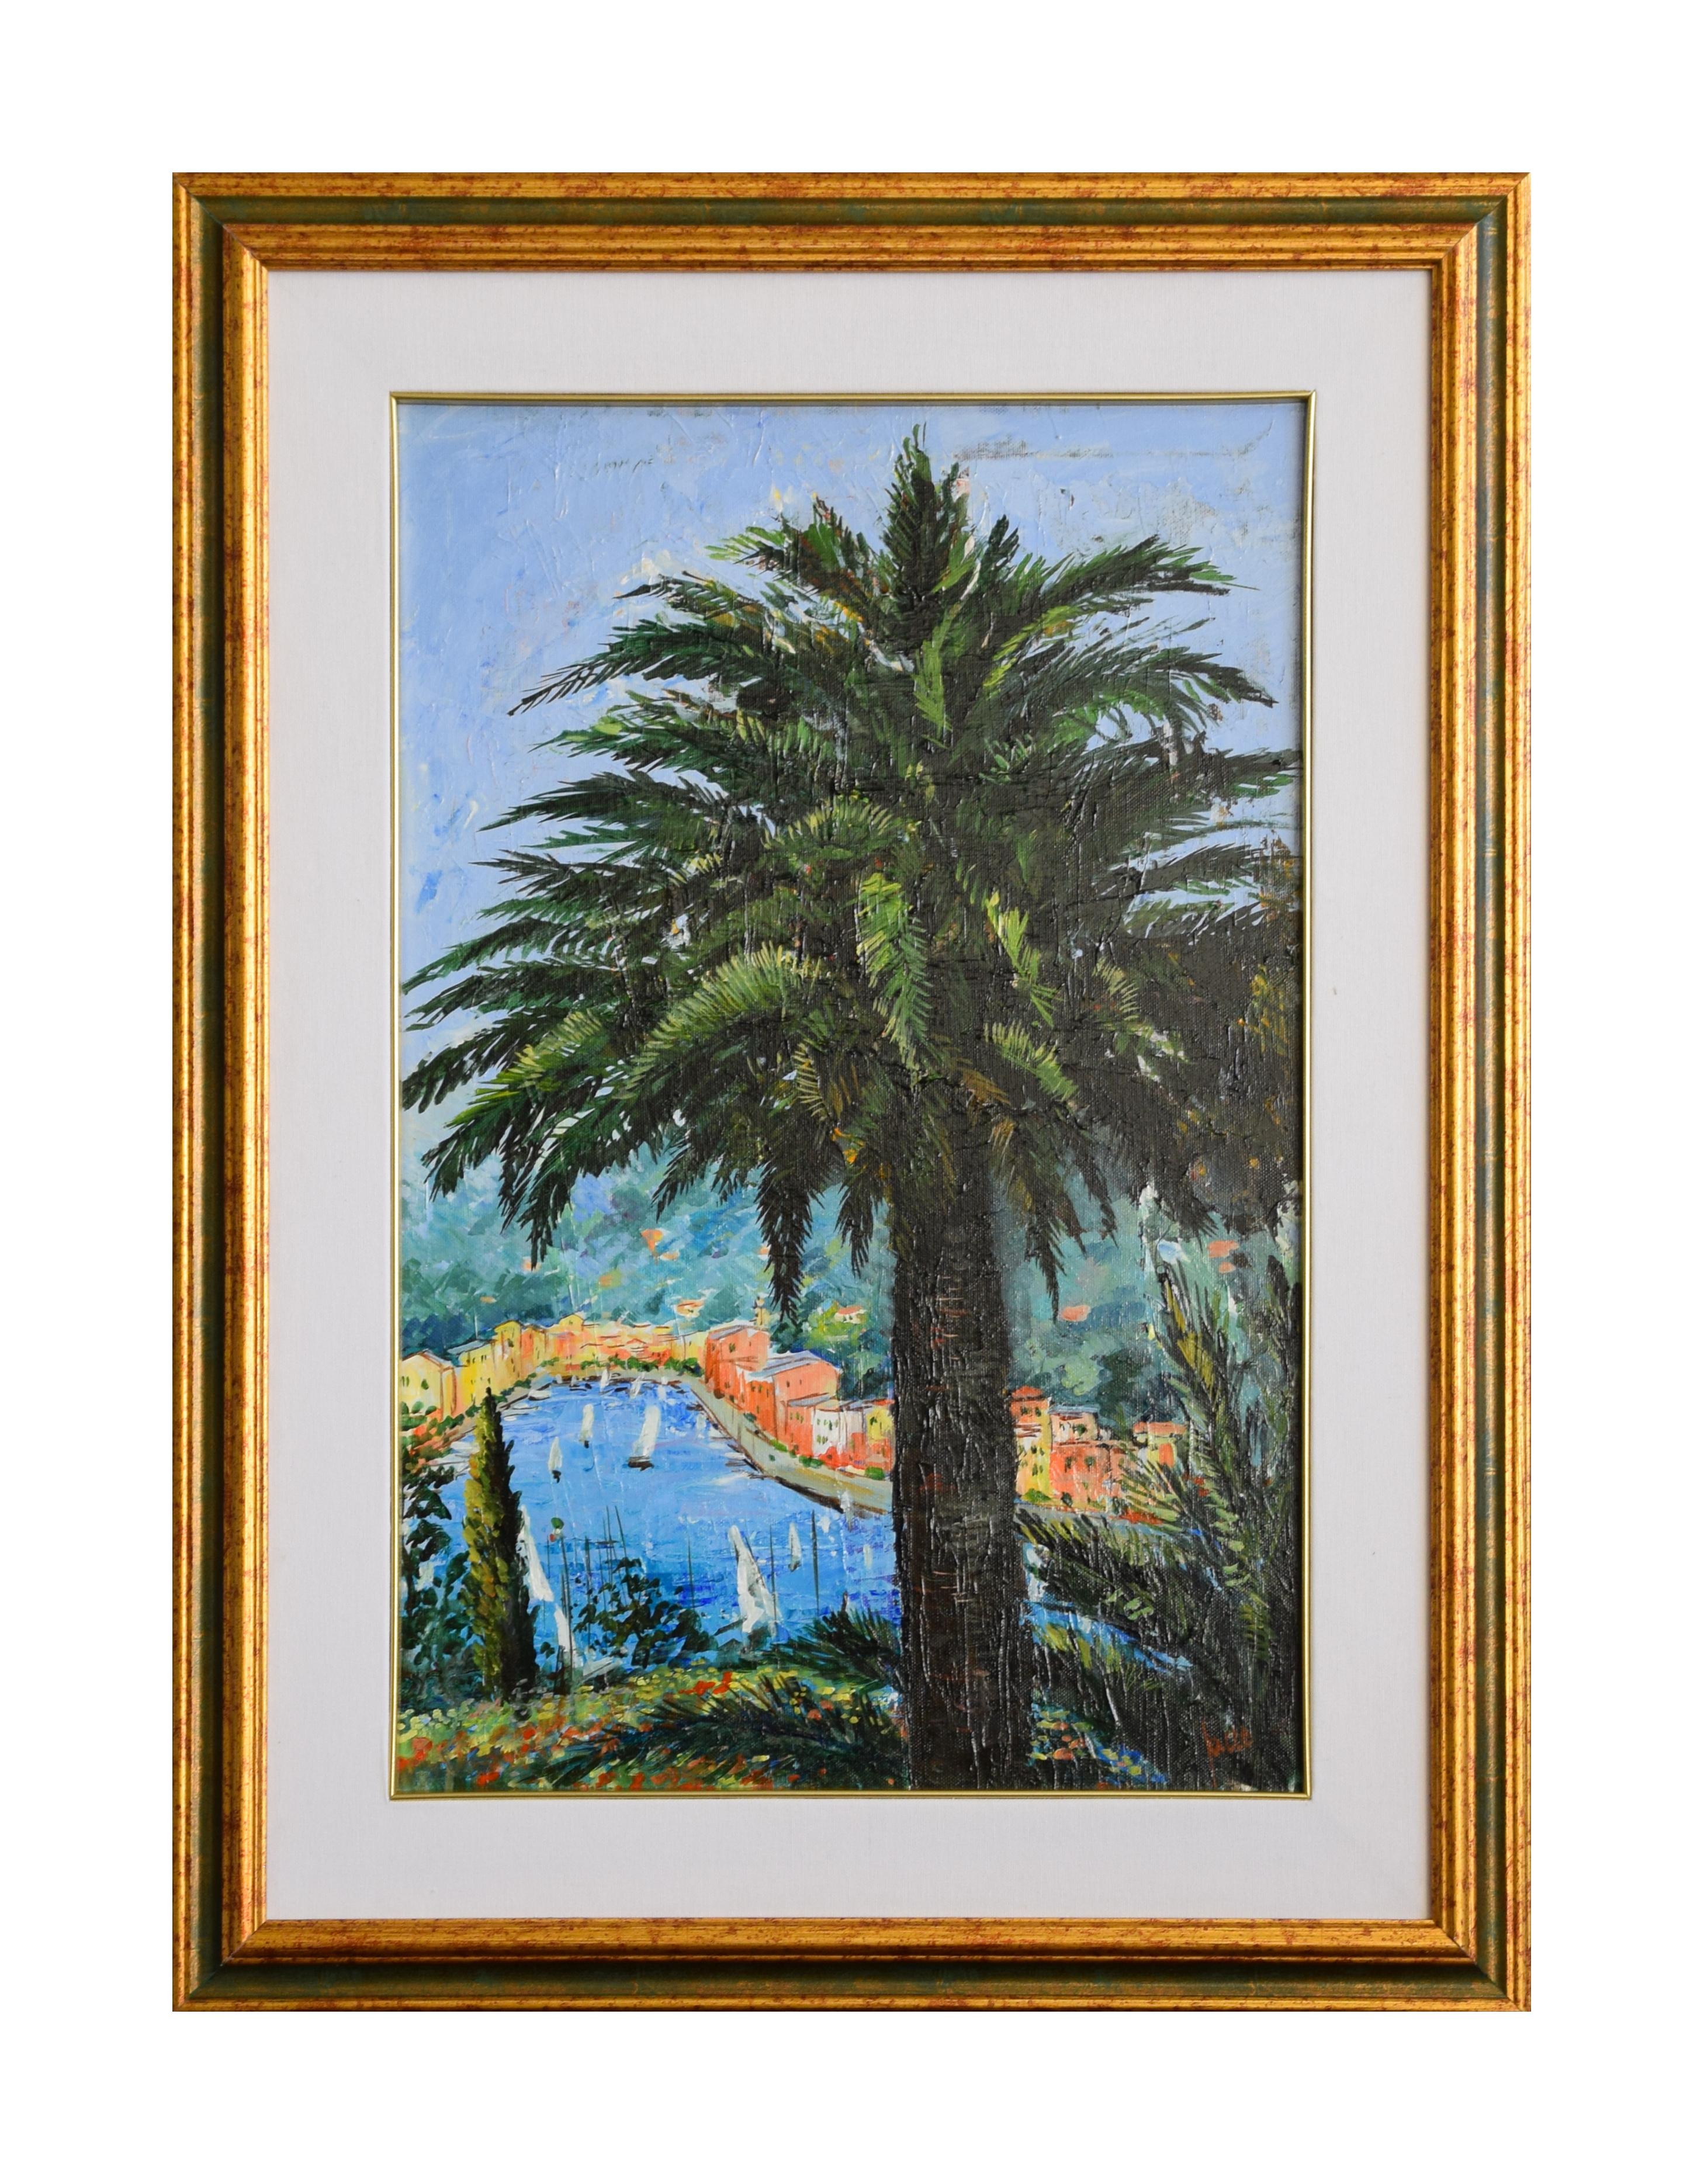 Portofino is a very colorful oil painting on canvas realized by the Italian contemporary artist Luciano Sacco.

It includes a beautiful frame (78 x 58 cm). Hand-signed by the artist on the lower right.

This painting represents the seascape of